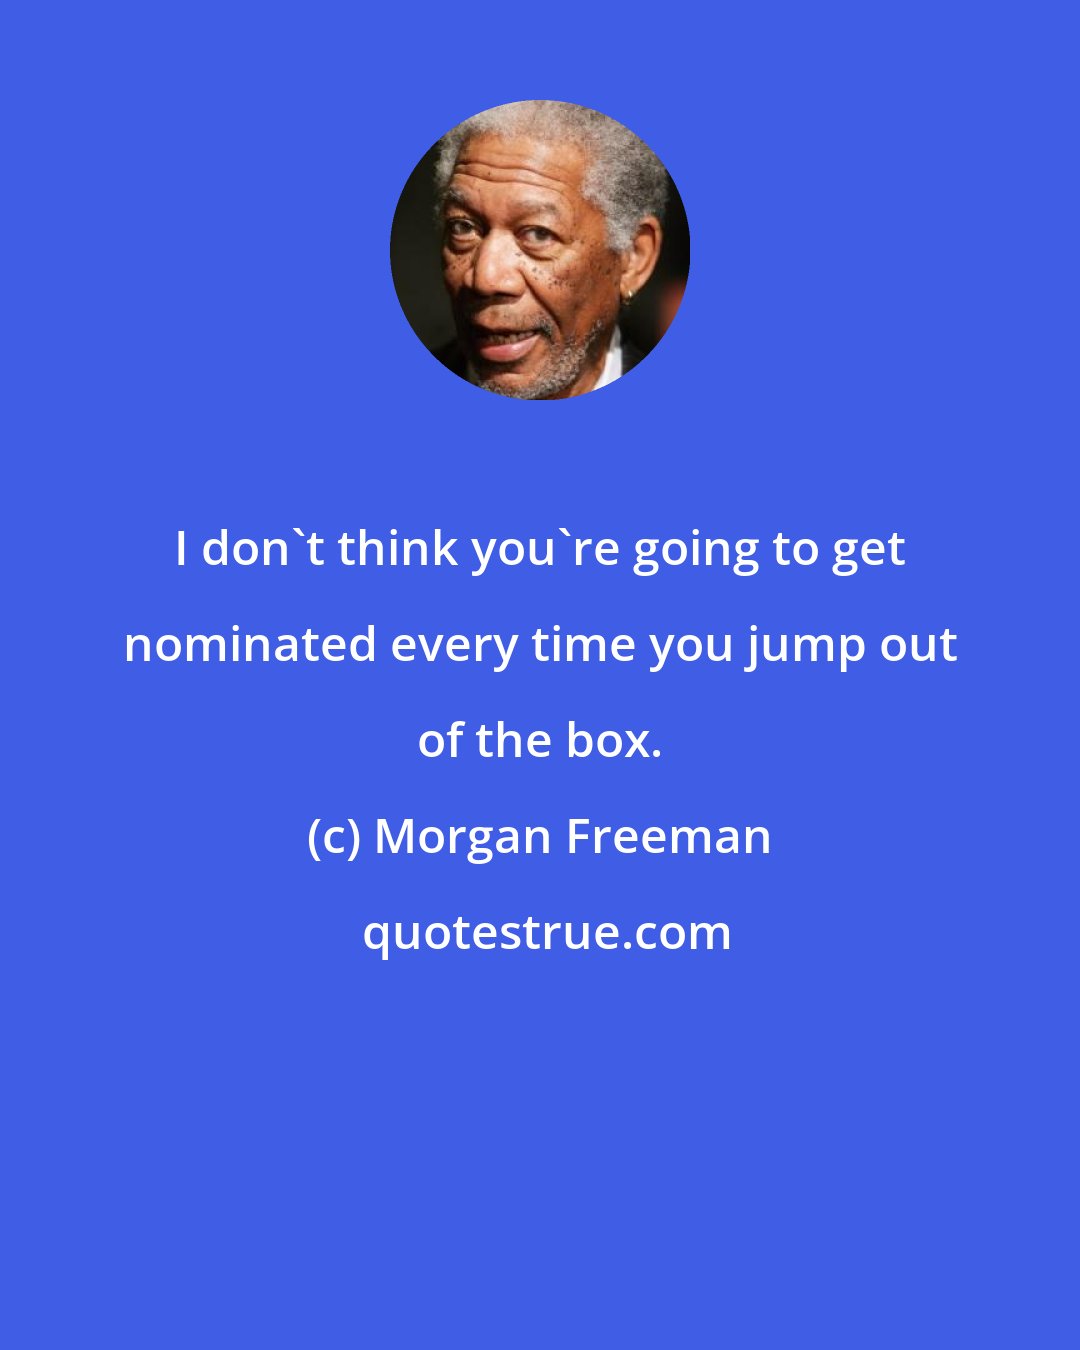 Morgan Freeman: I don't think you're going to get nominated every time you jump out of the box.